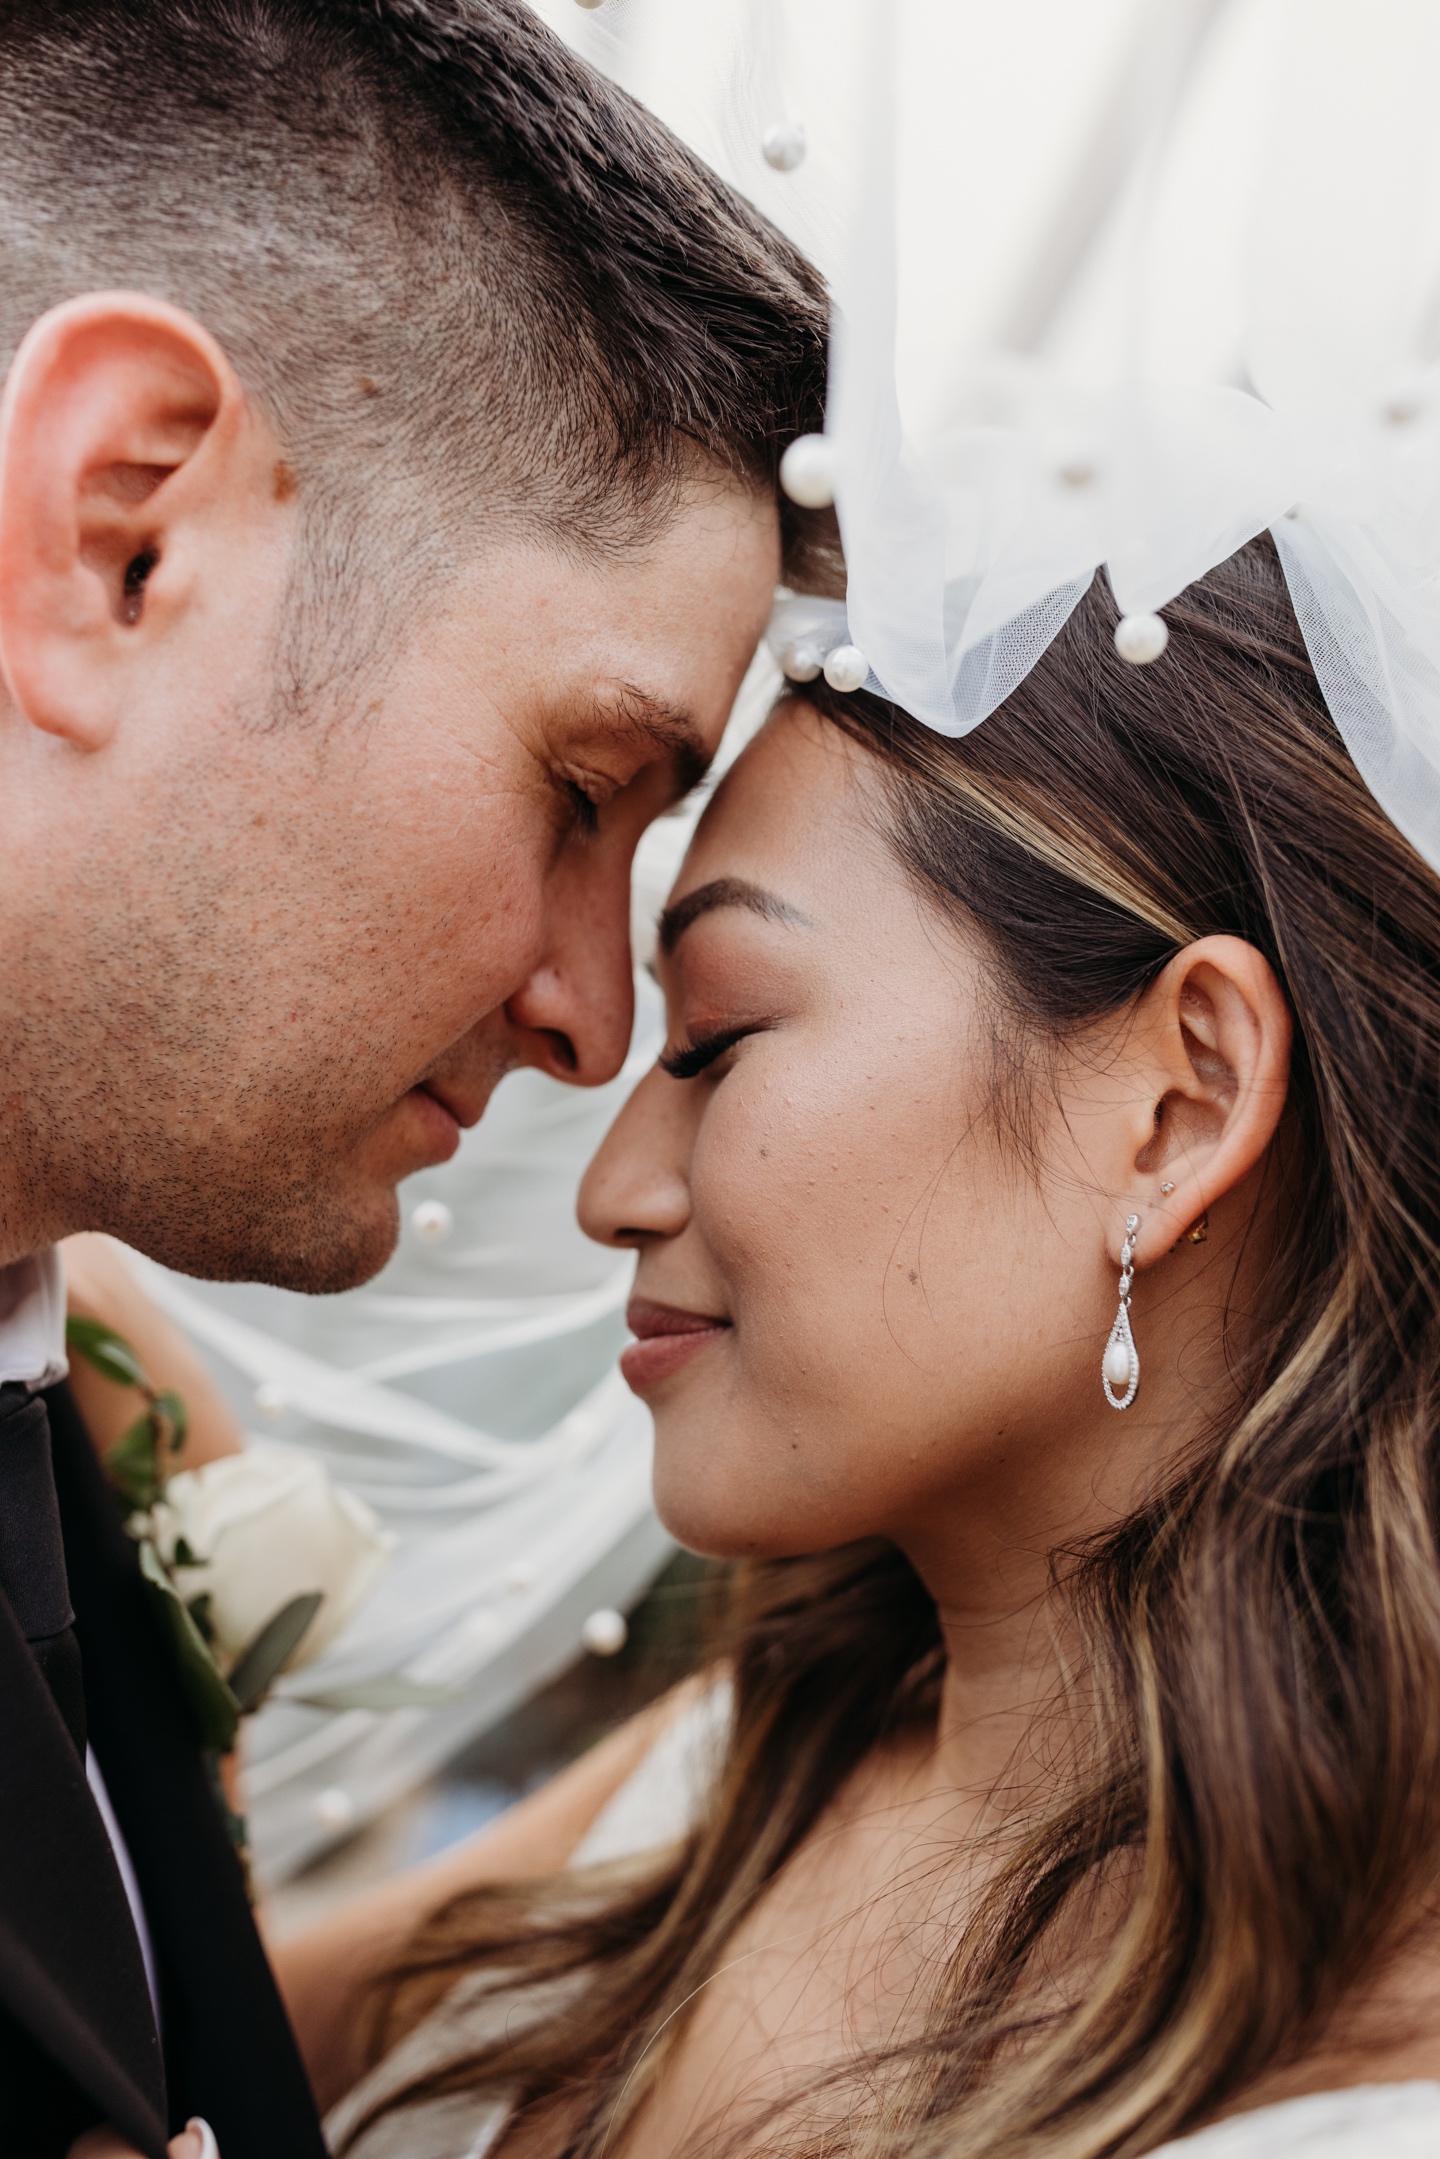 Close up of the bride and groom touching foreheads beneath the bride's veil. Liz Koston Photography.